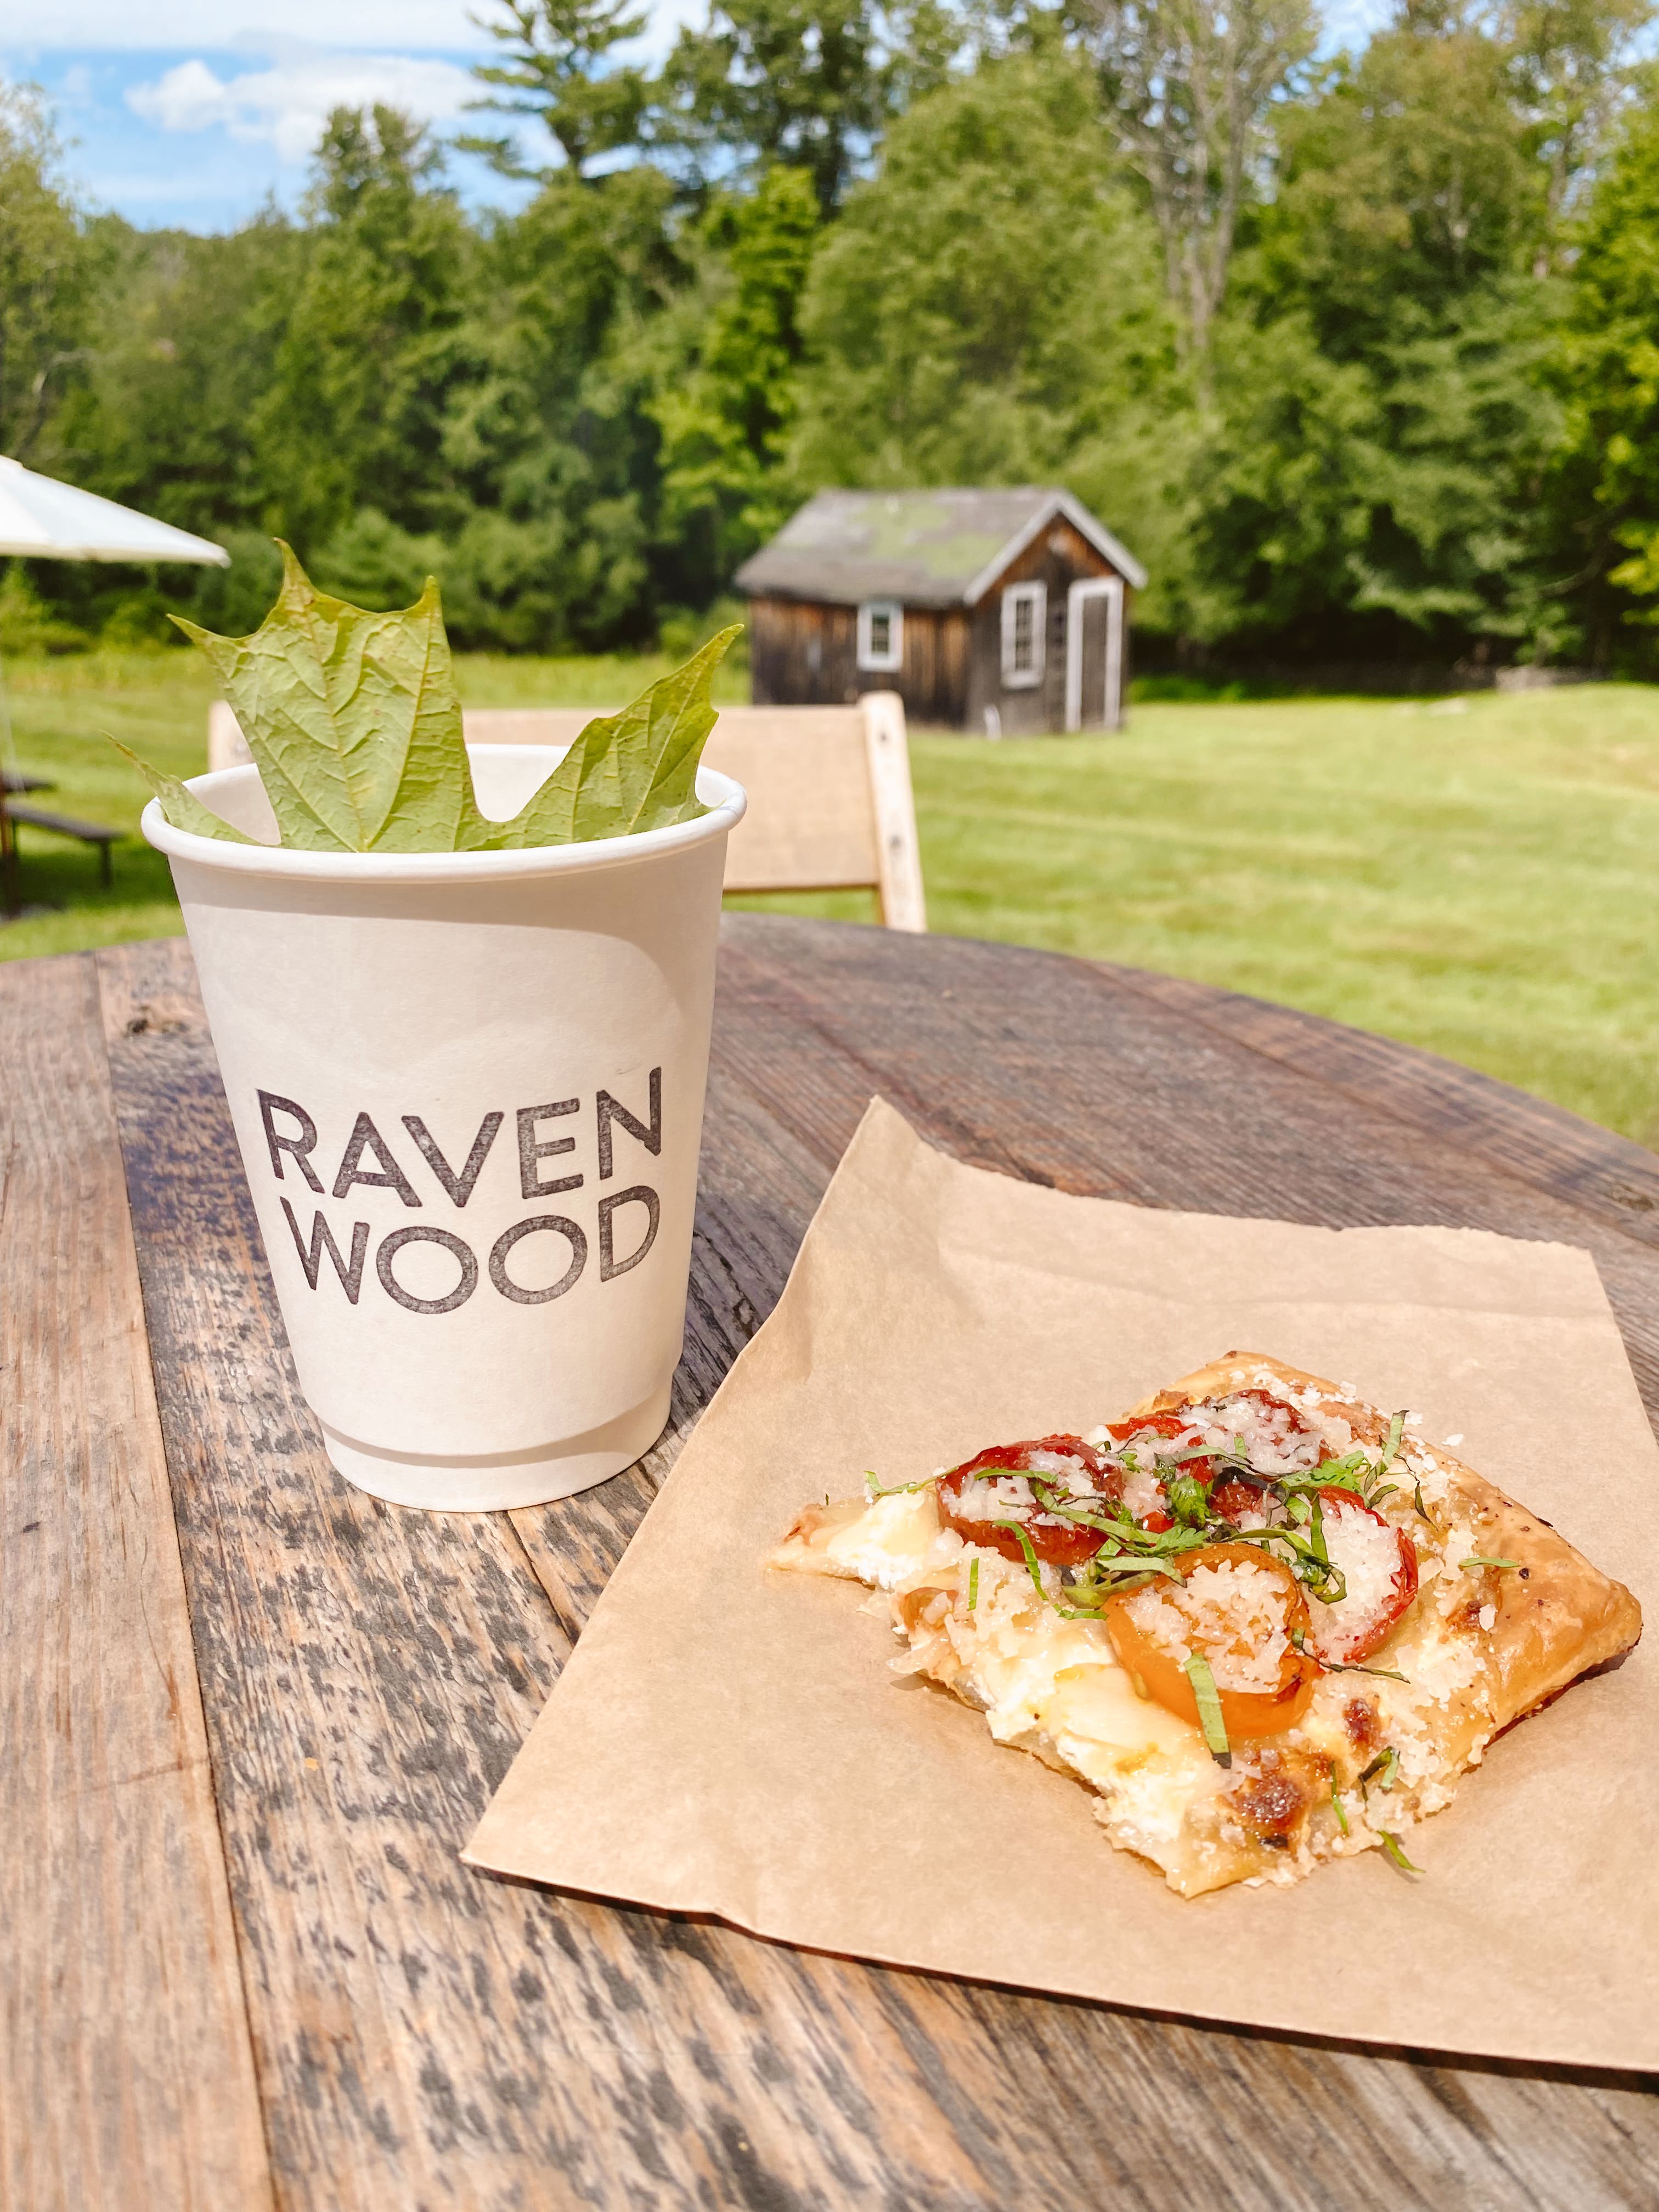 A piece of pizza and a paper coffee mug on a table with a view of a green lawn and trees at Ravenwood Barn